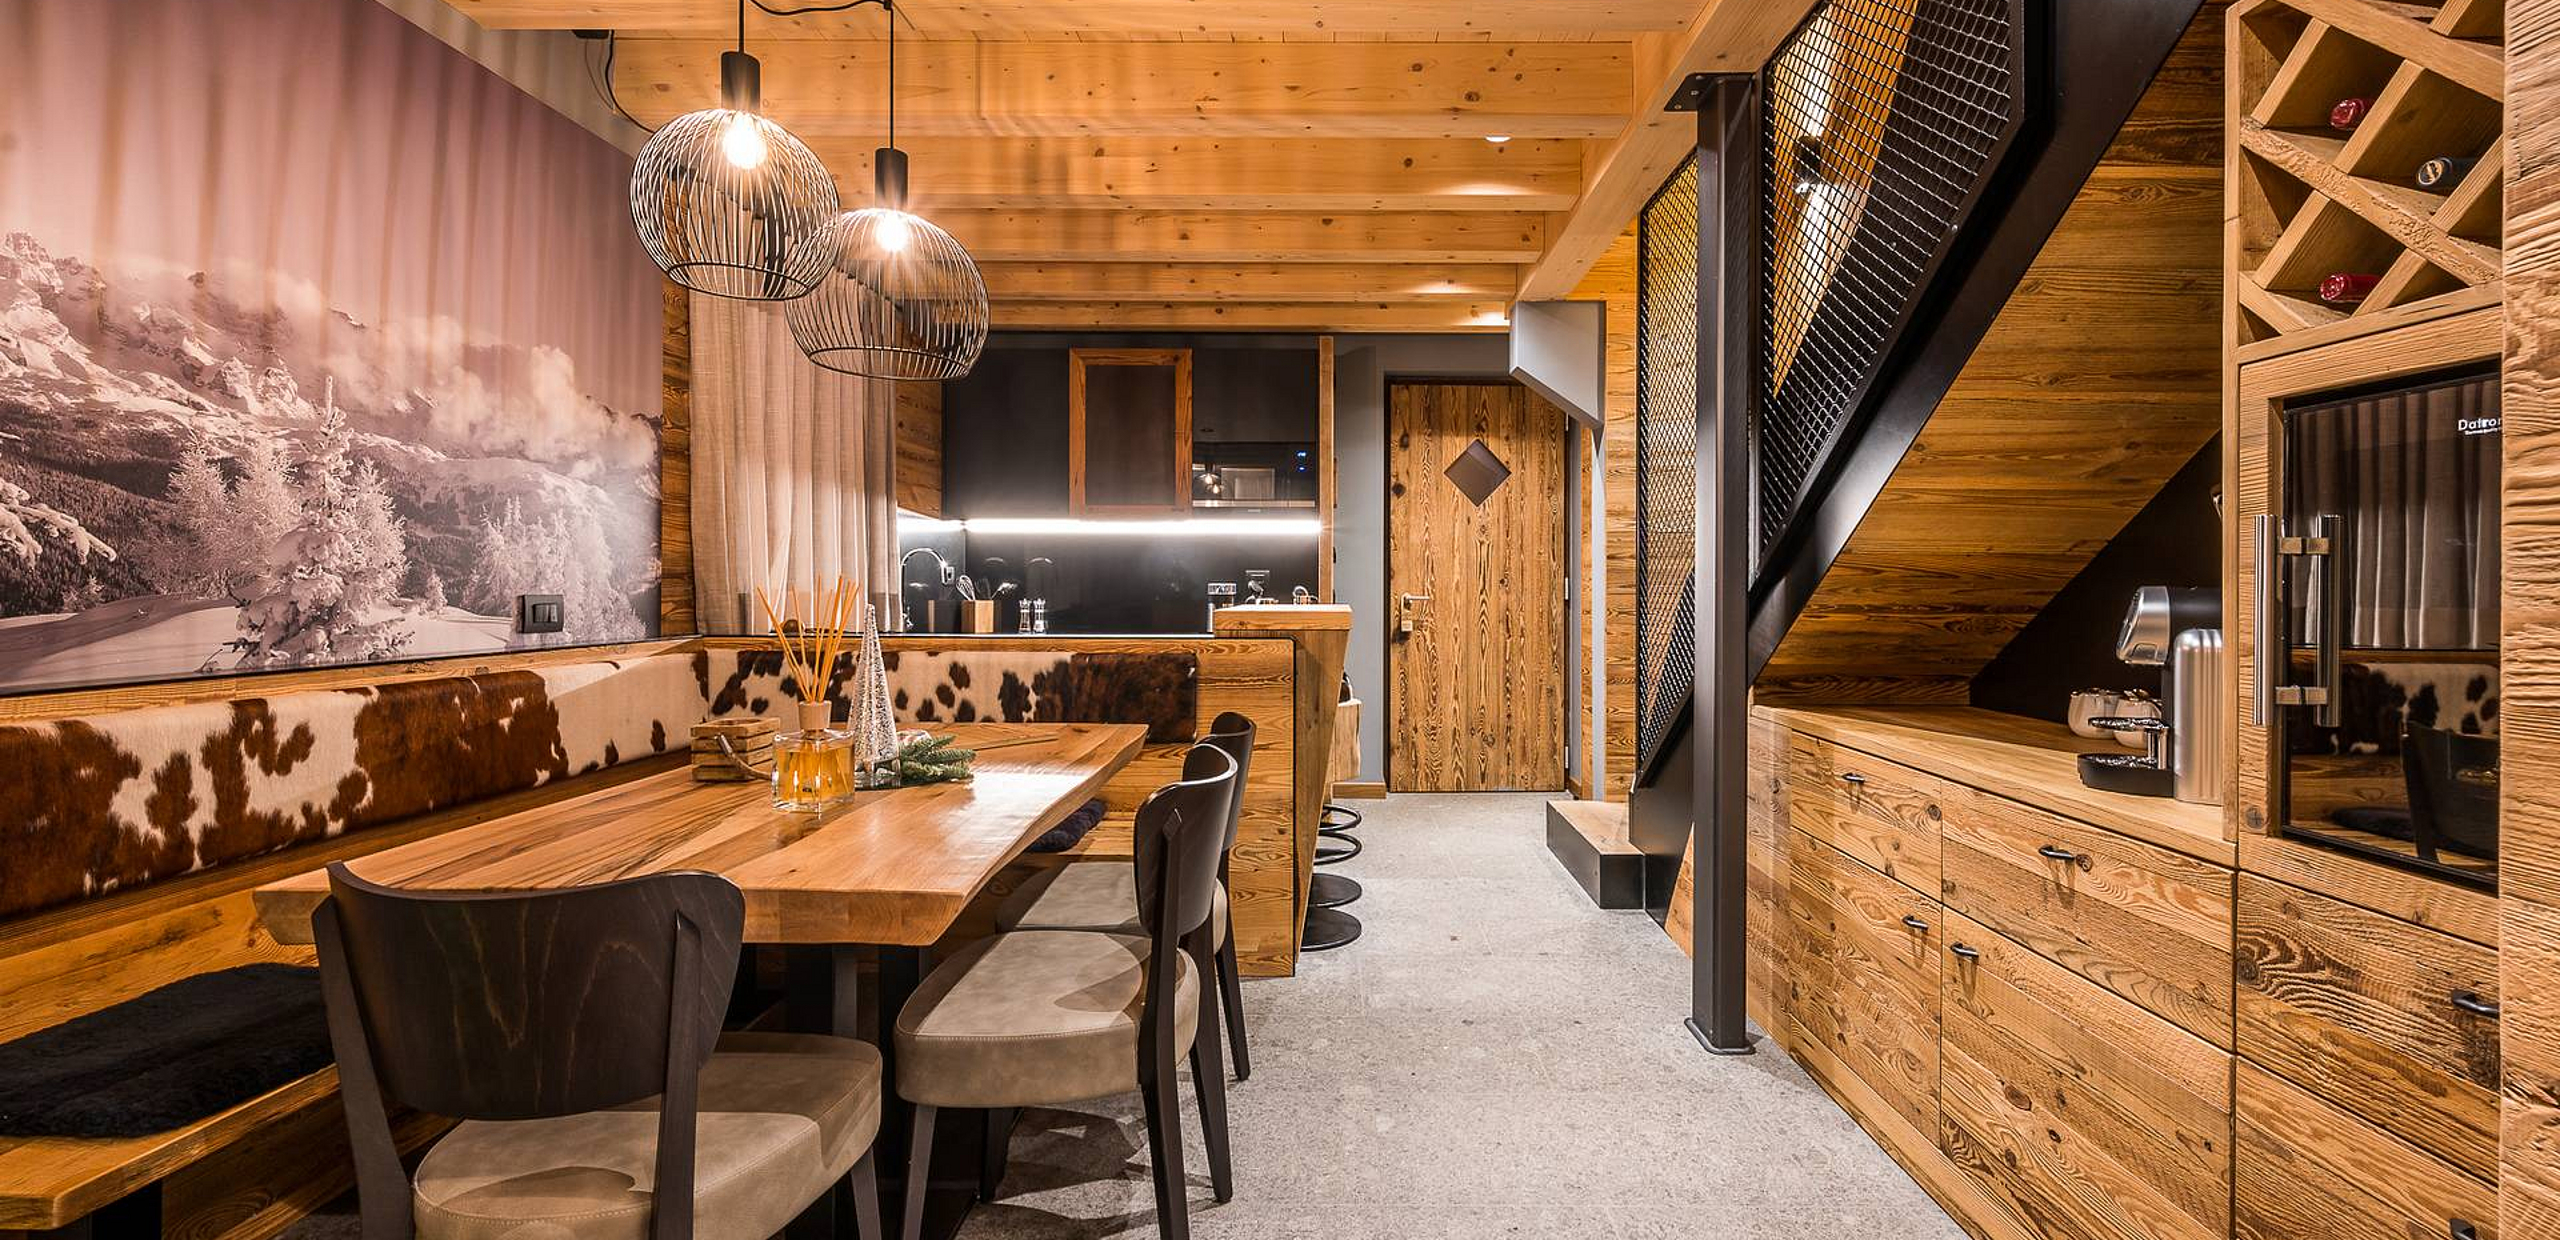 Lodge - Luxury chalet in Val di Sole, Trentino